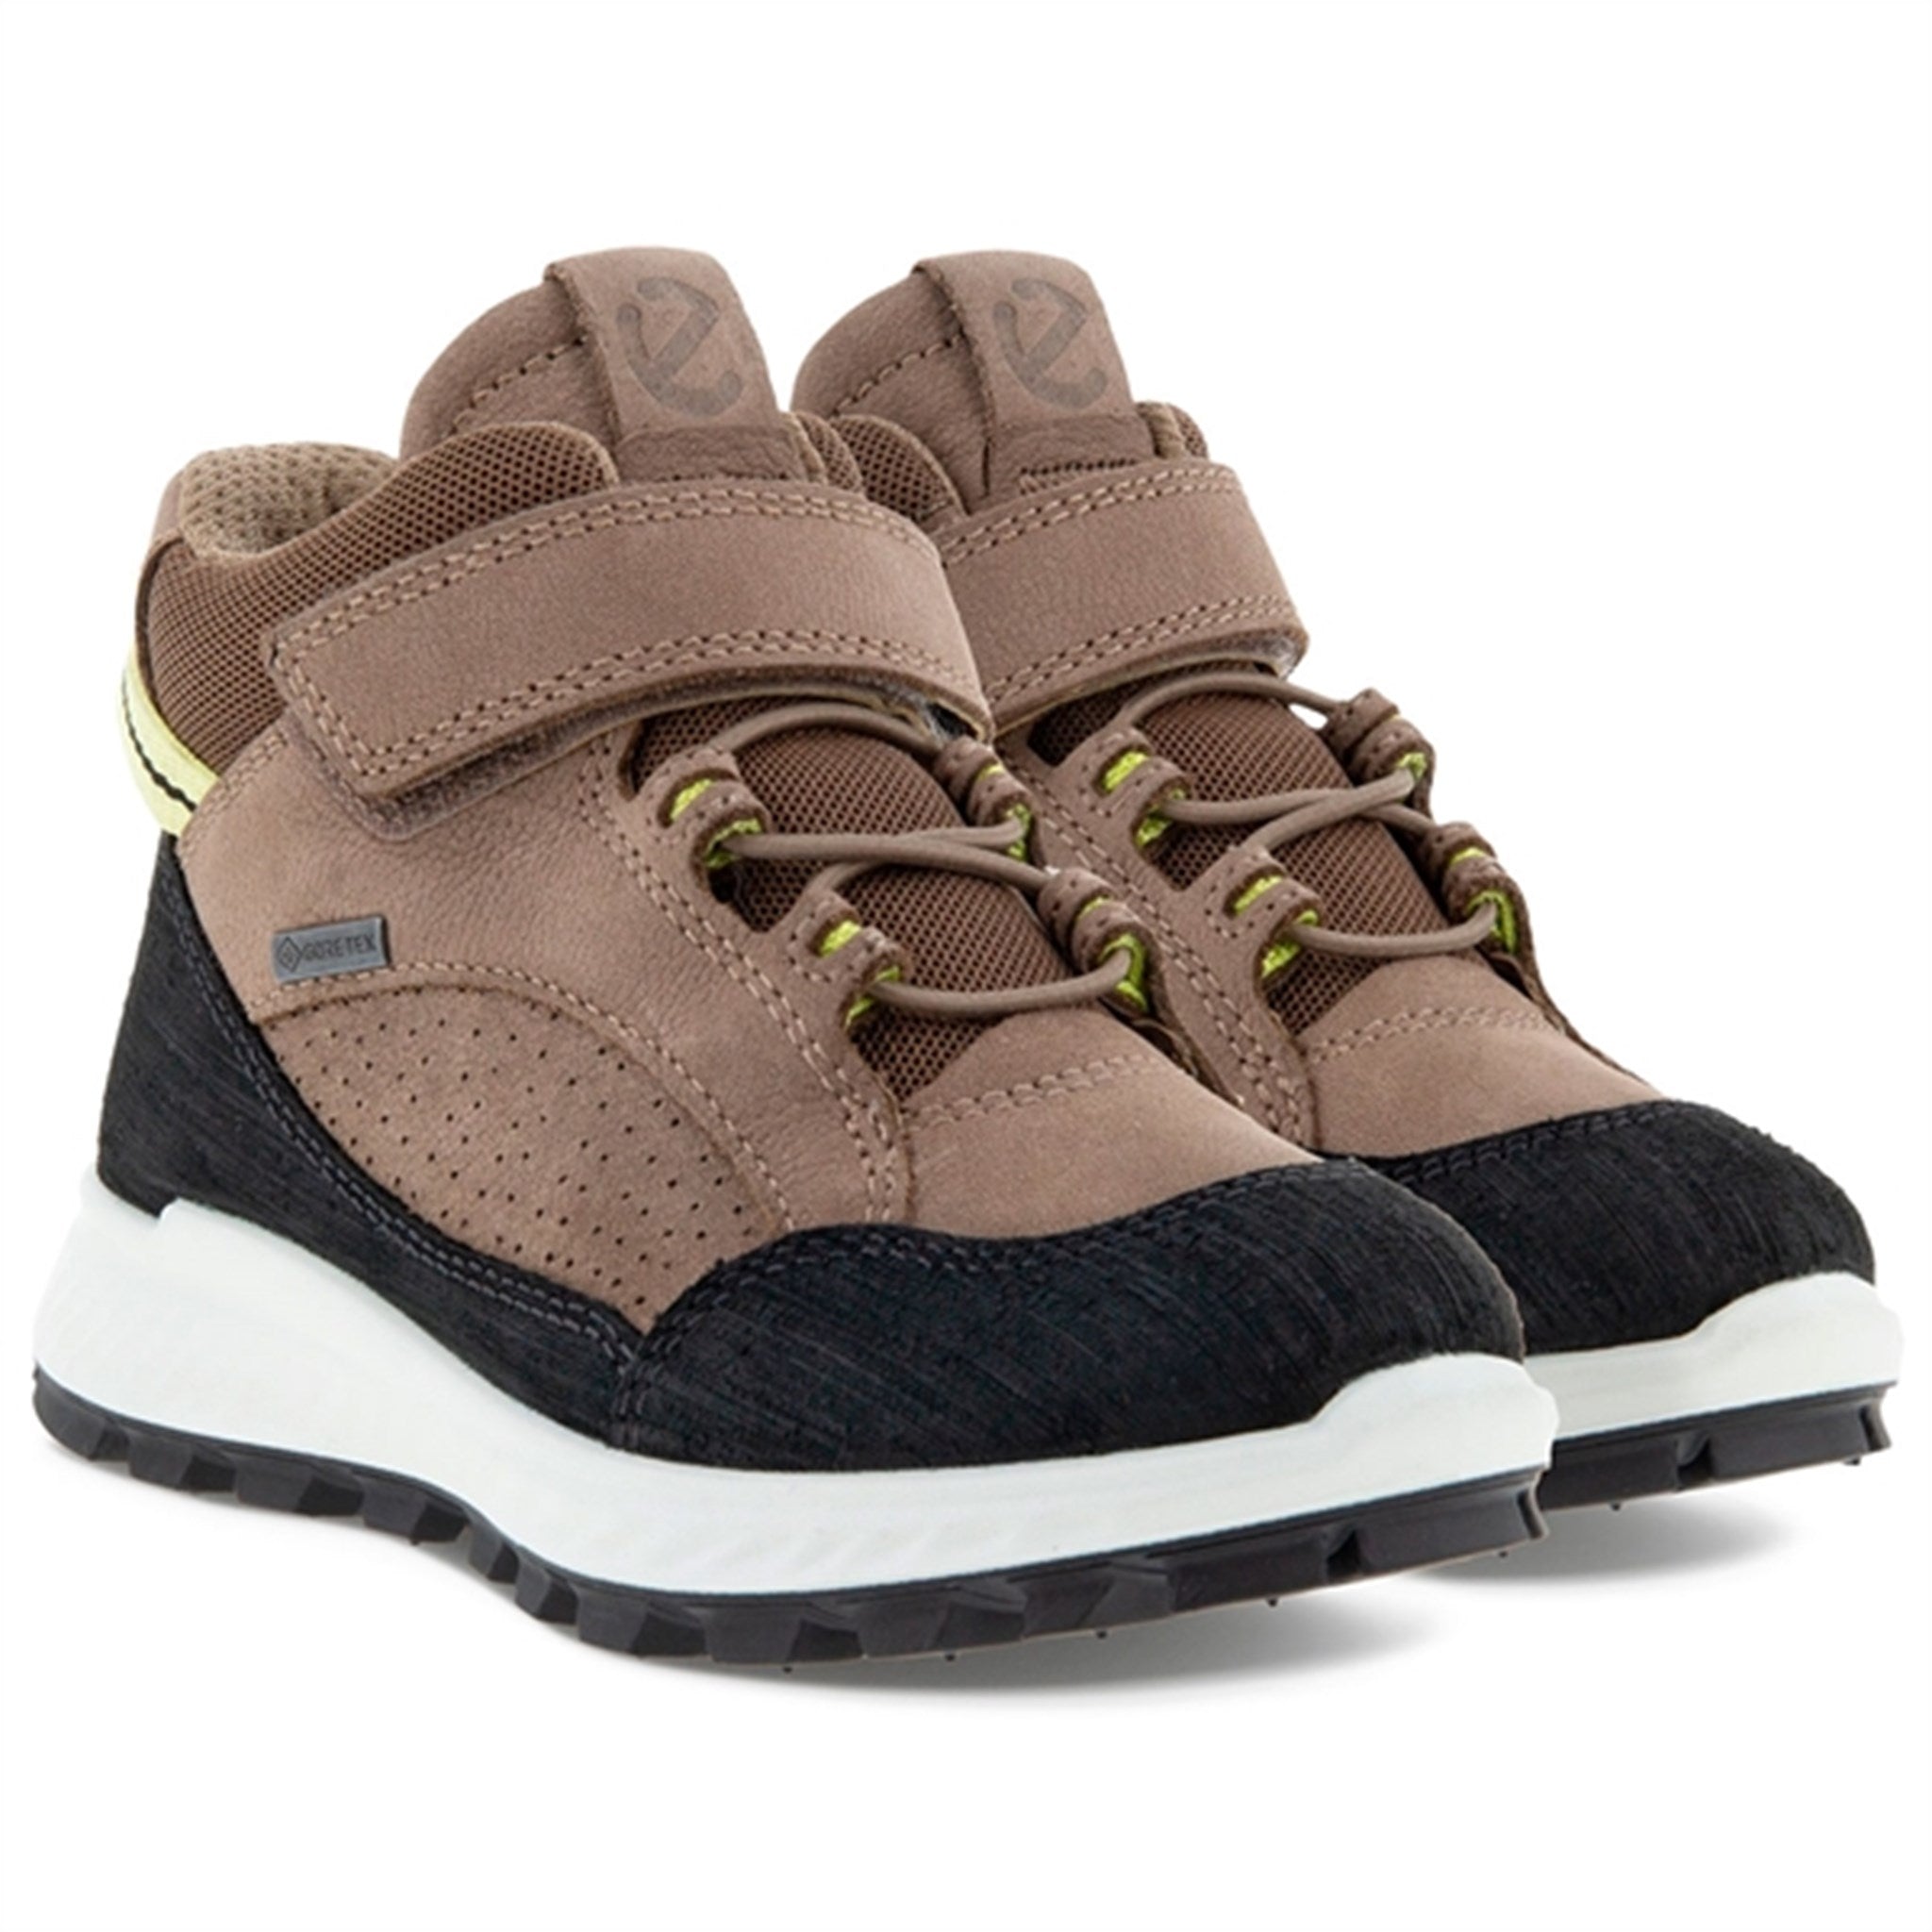 Ecco Exostrike Kids Ankle Boot Black/Taupe/Taupe 3